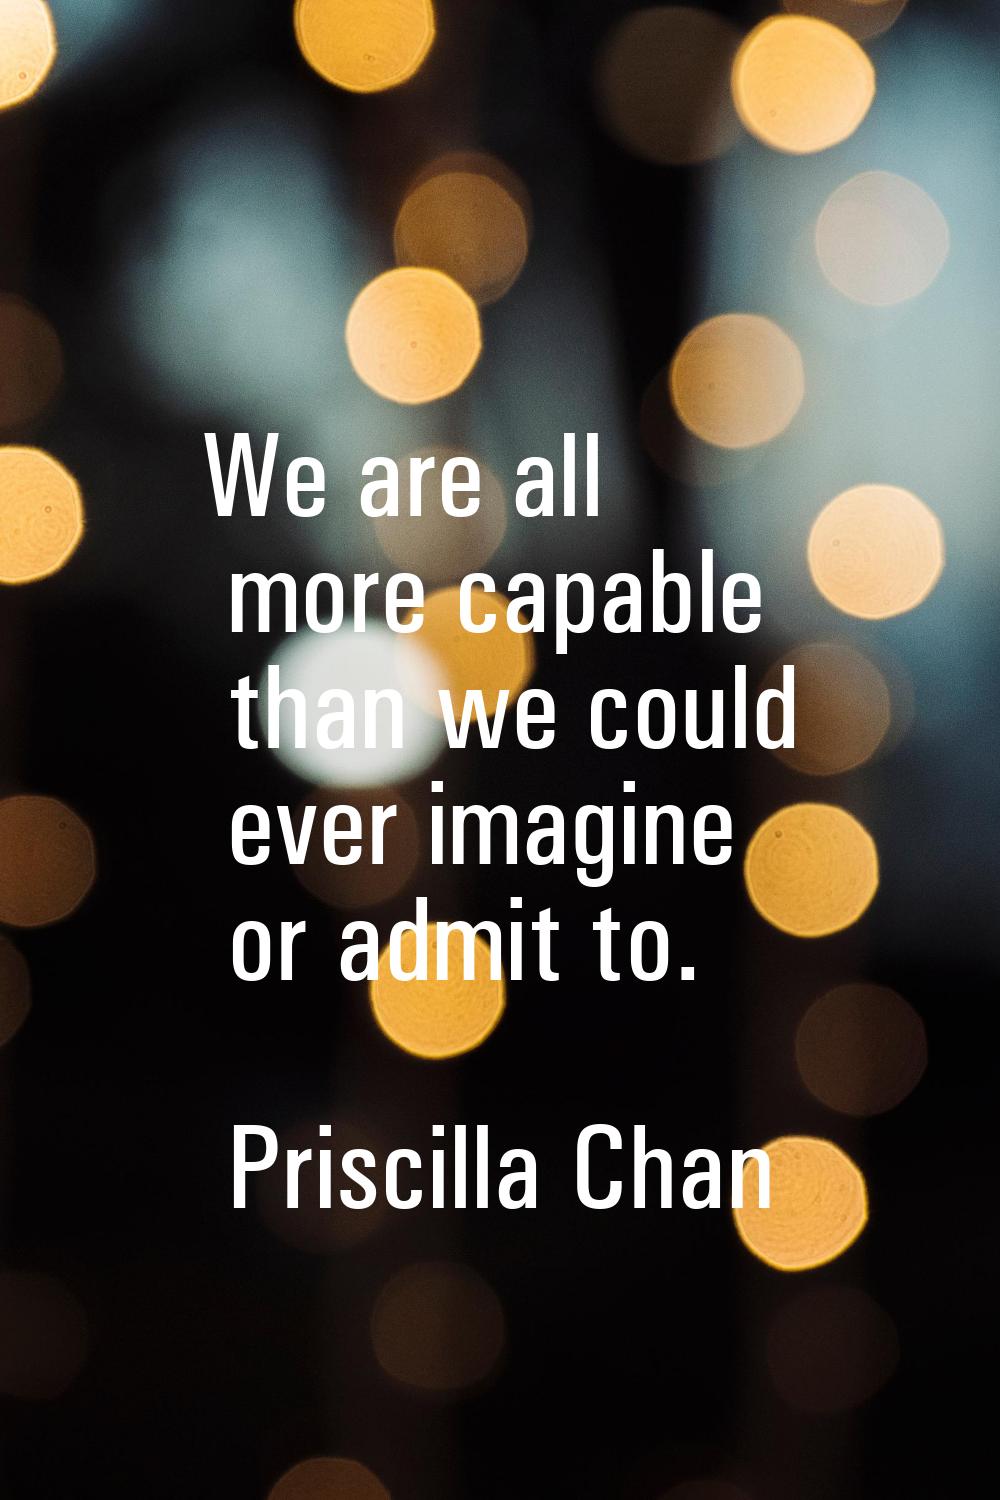 We are all more capable than we could ever imagine or admit to.